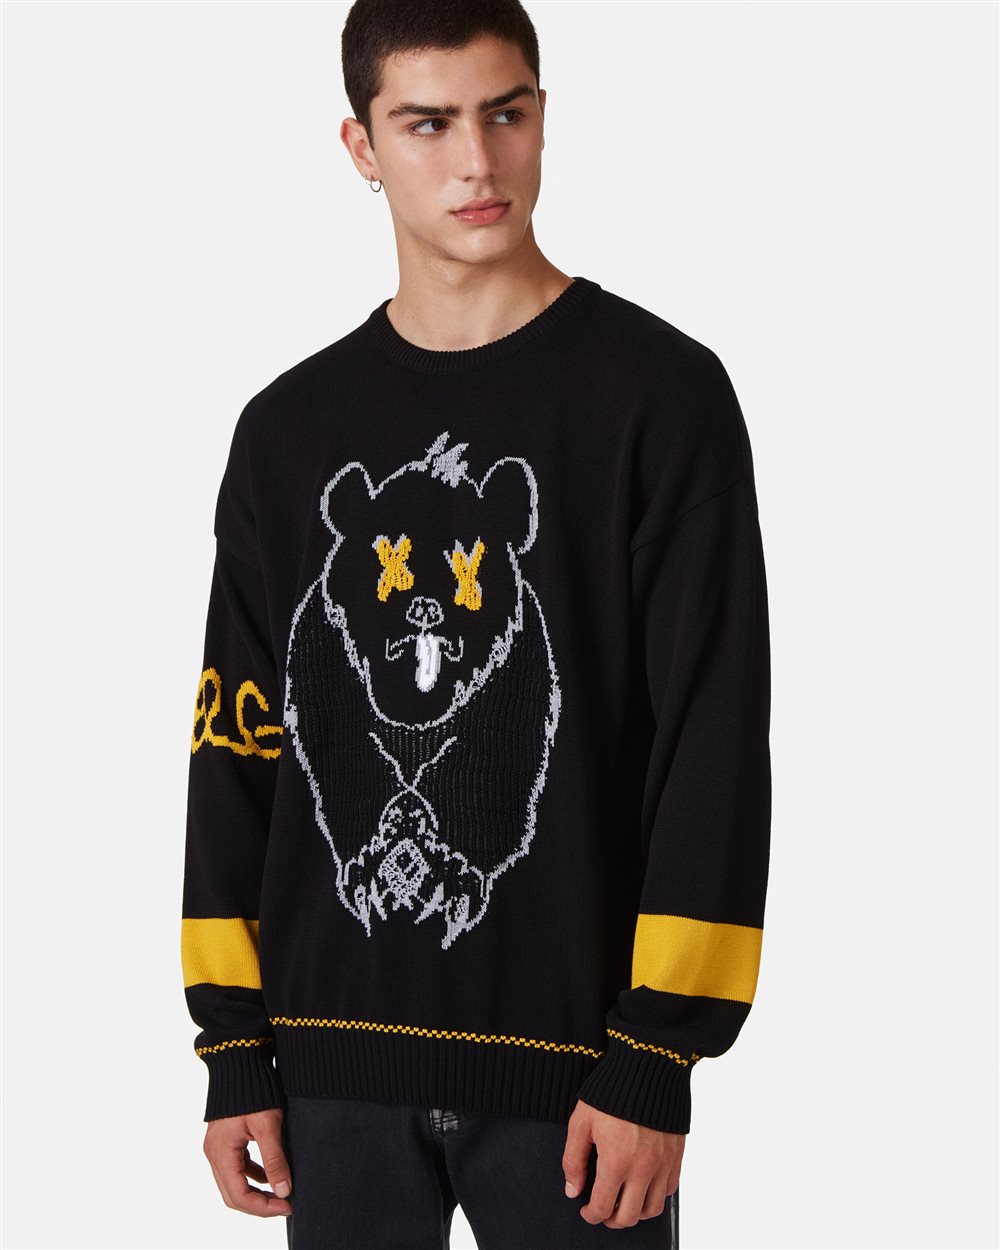 Sweater with cartoon graphics and logo - Iceberg - Official Website